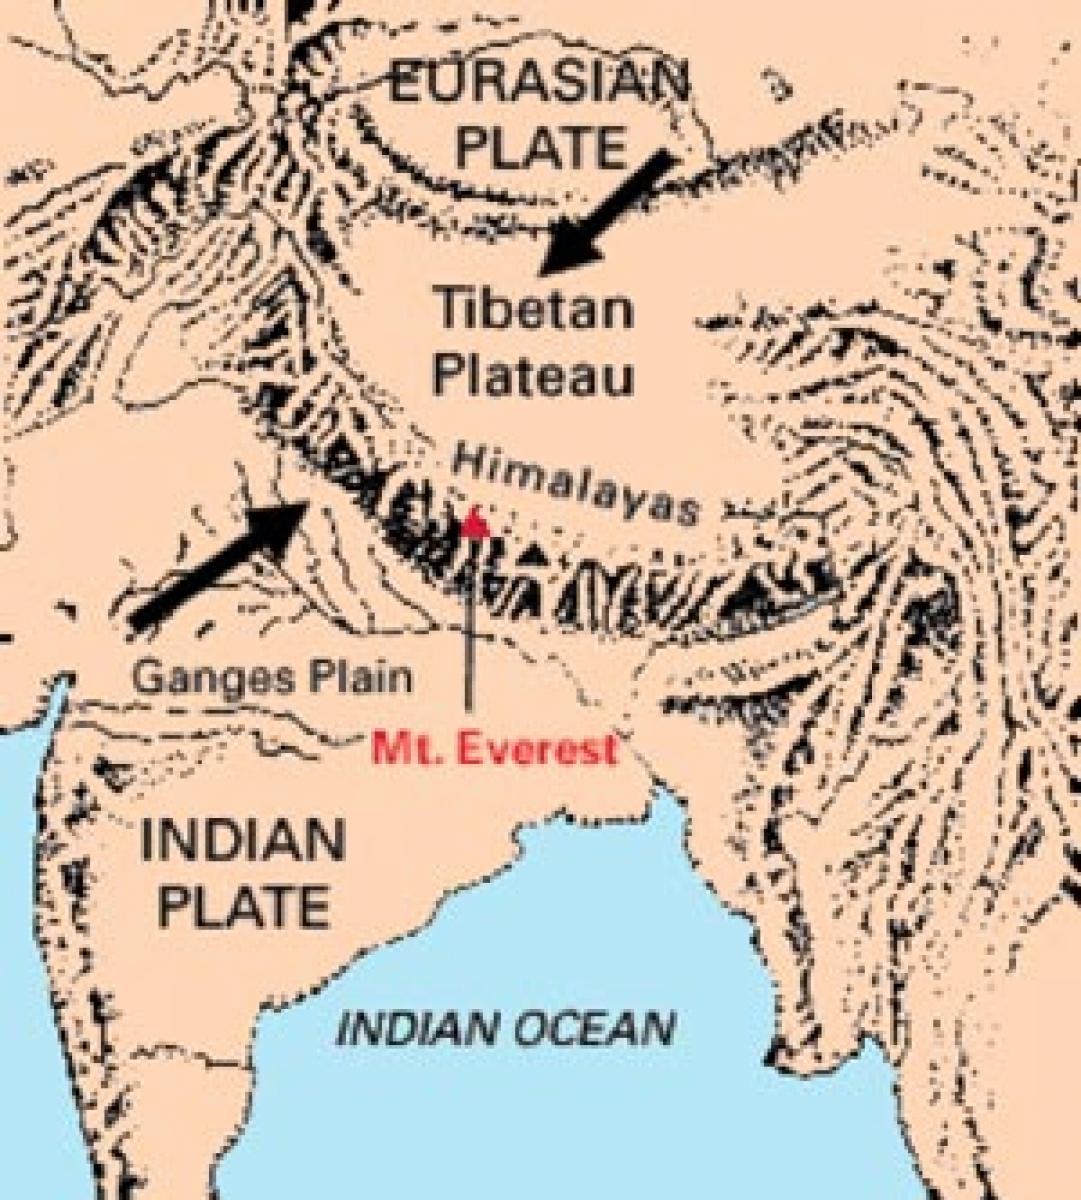 India was not isolated before colliding with Eurasian plate: Scientists